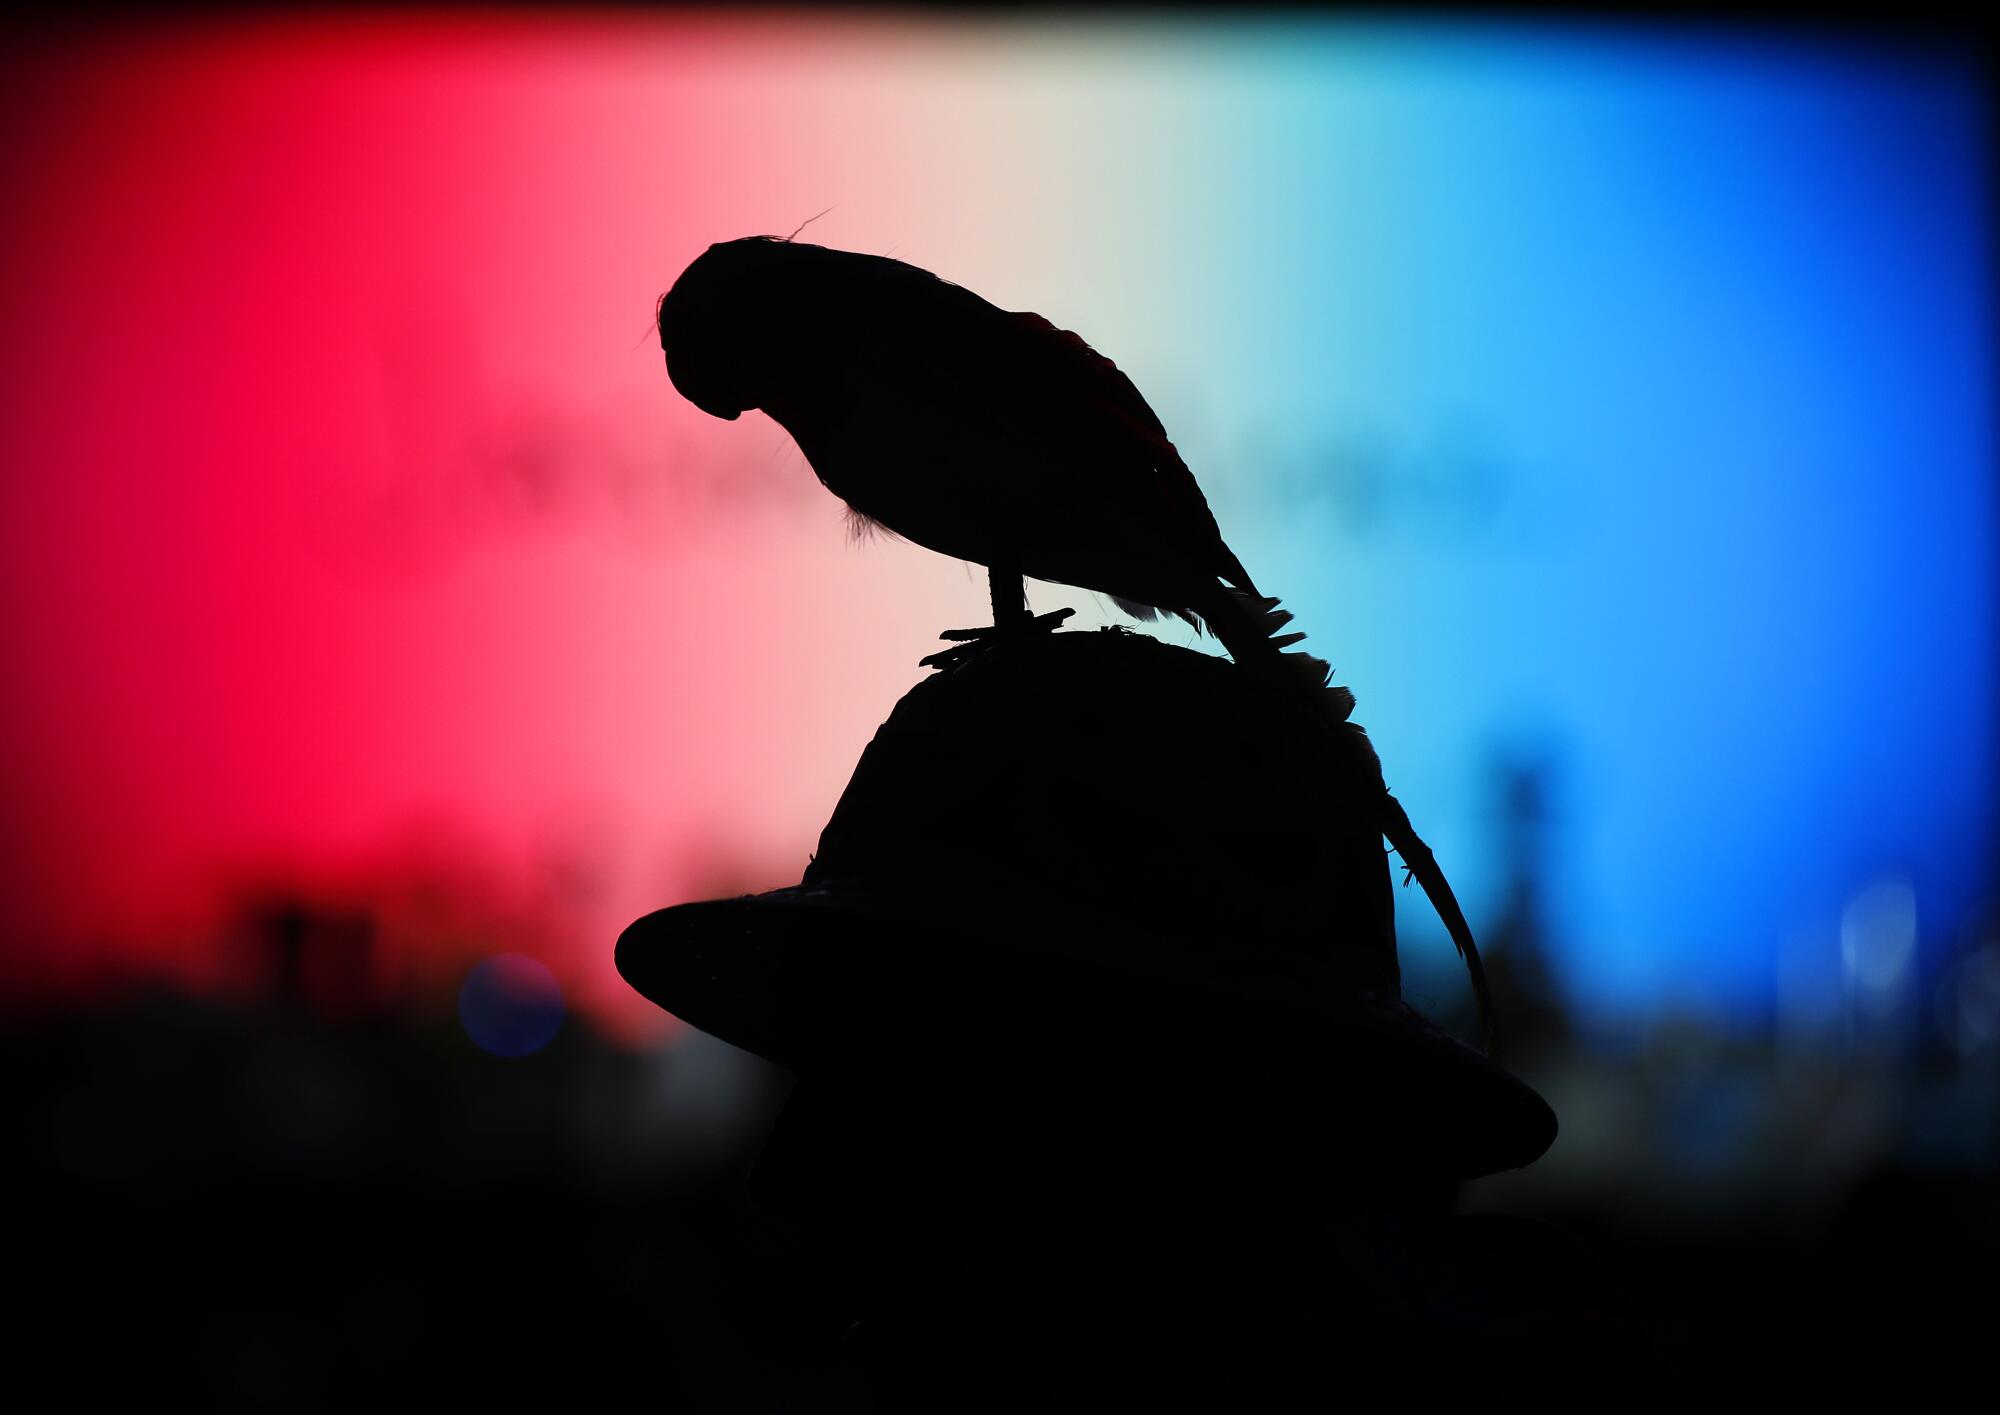 A fan walks walks around with a fake parrot on his hat at the Jimmy Buffett concert.